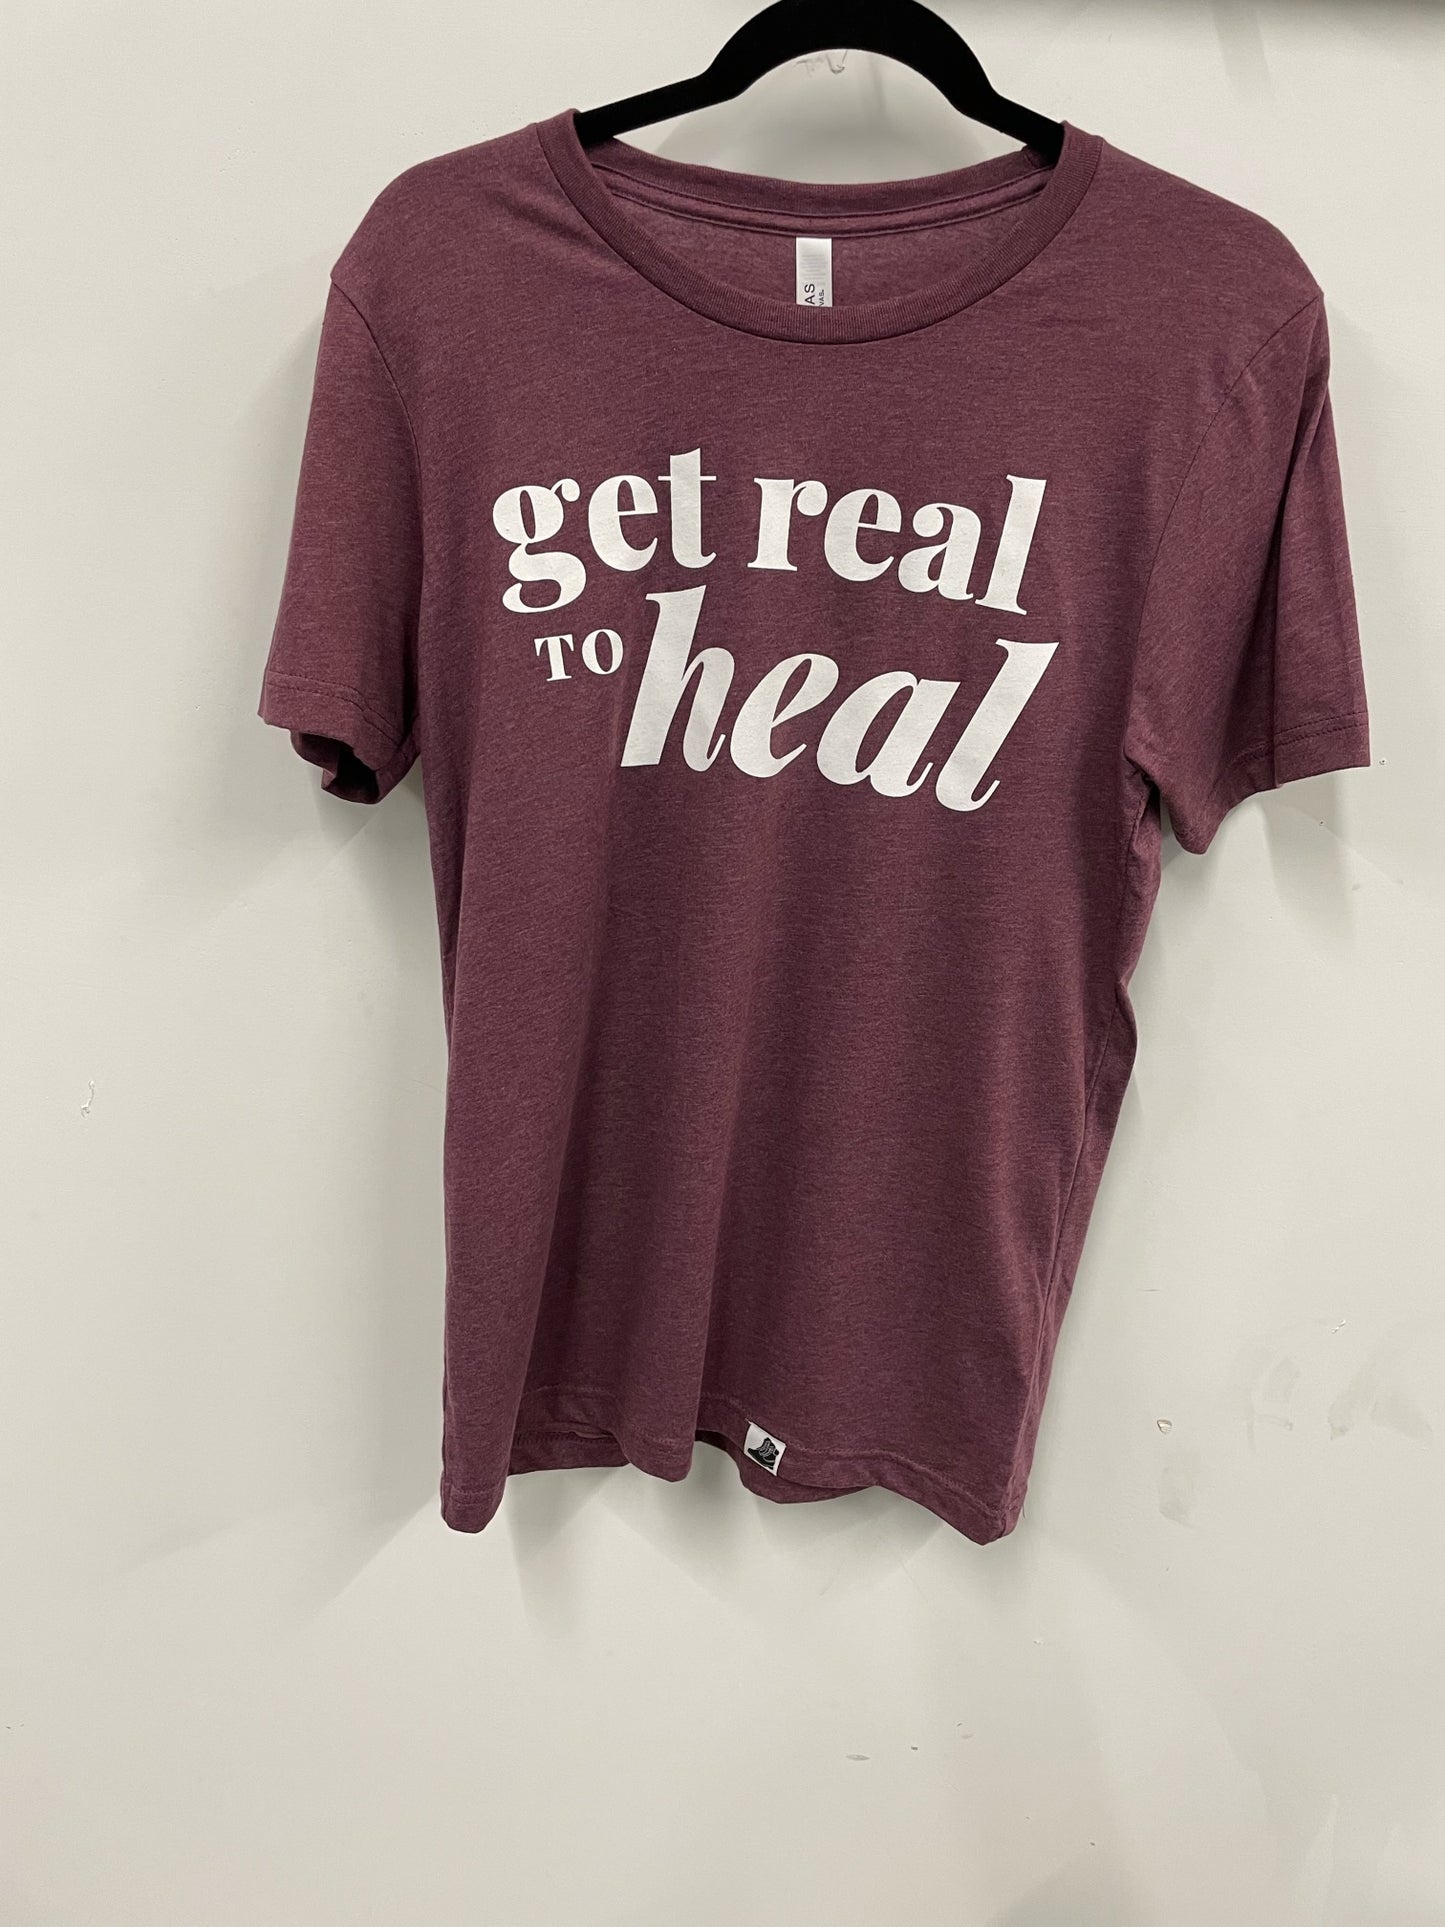 Get Real to Heal Burgundy T-Shirt